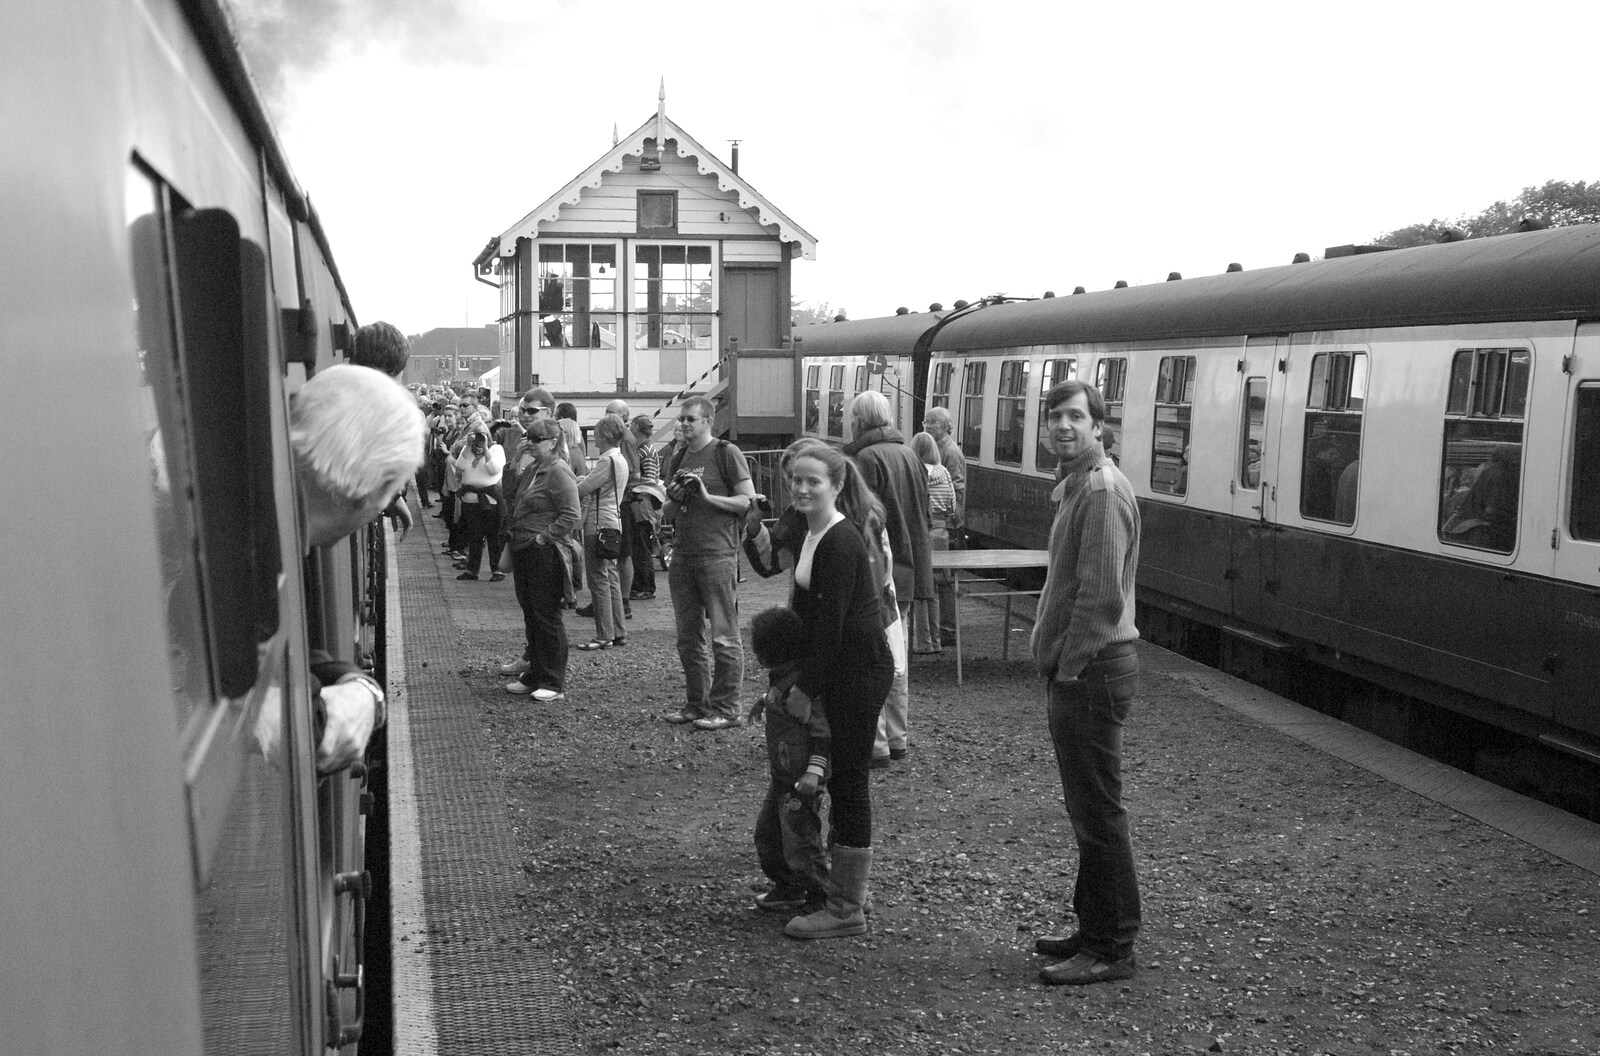 The train pulls in to Sheringham from The 1940s Steam Train Weekend, Holt, Norfolk - 18th September 2011